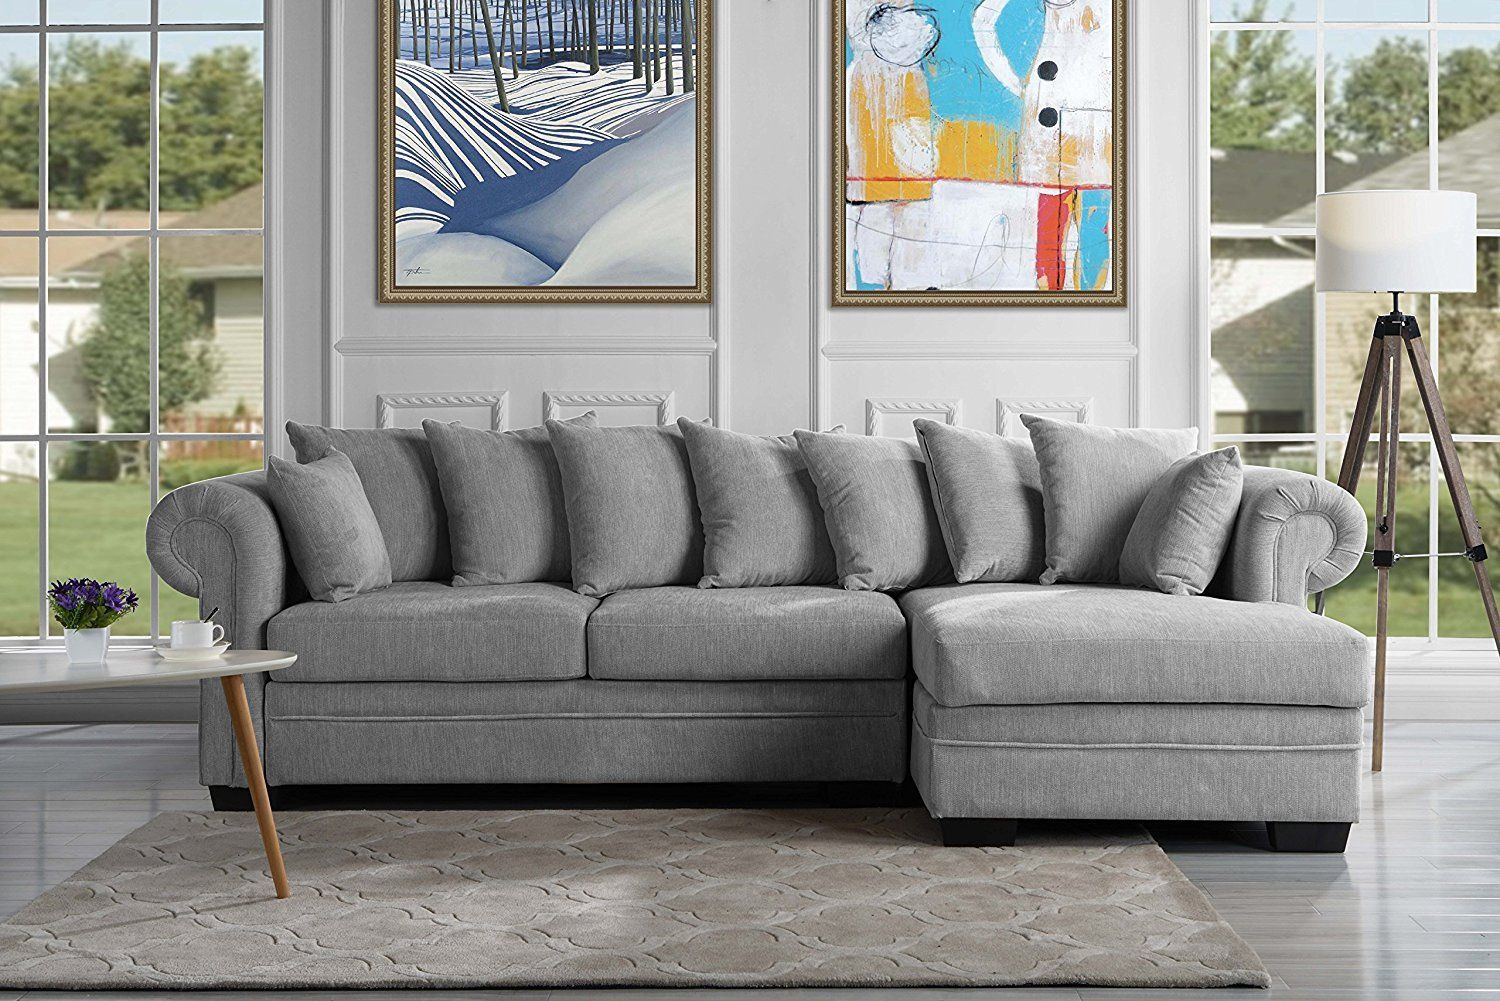 Modern Large Sectional Sofa, L Shape Couch W/ Extra Wide Chaise, Light Pertaining To Modern L Shaped Sofa Sectionals (View 11 of 20)